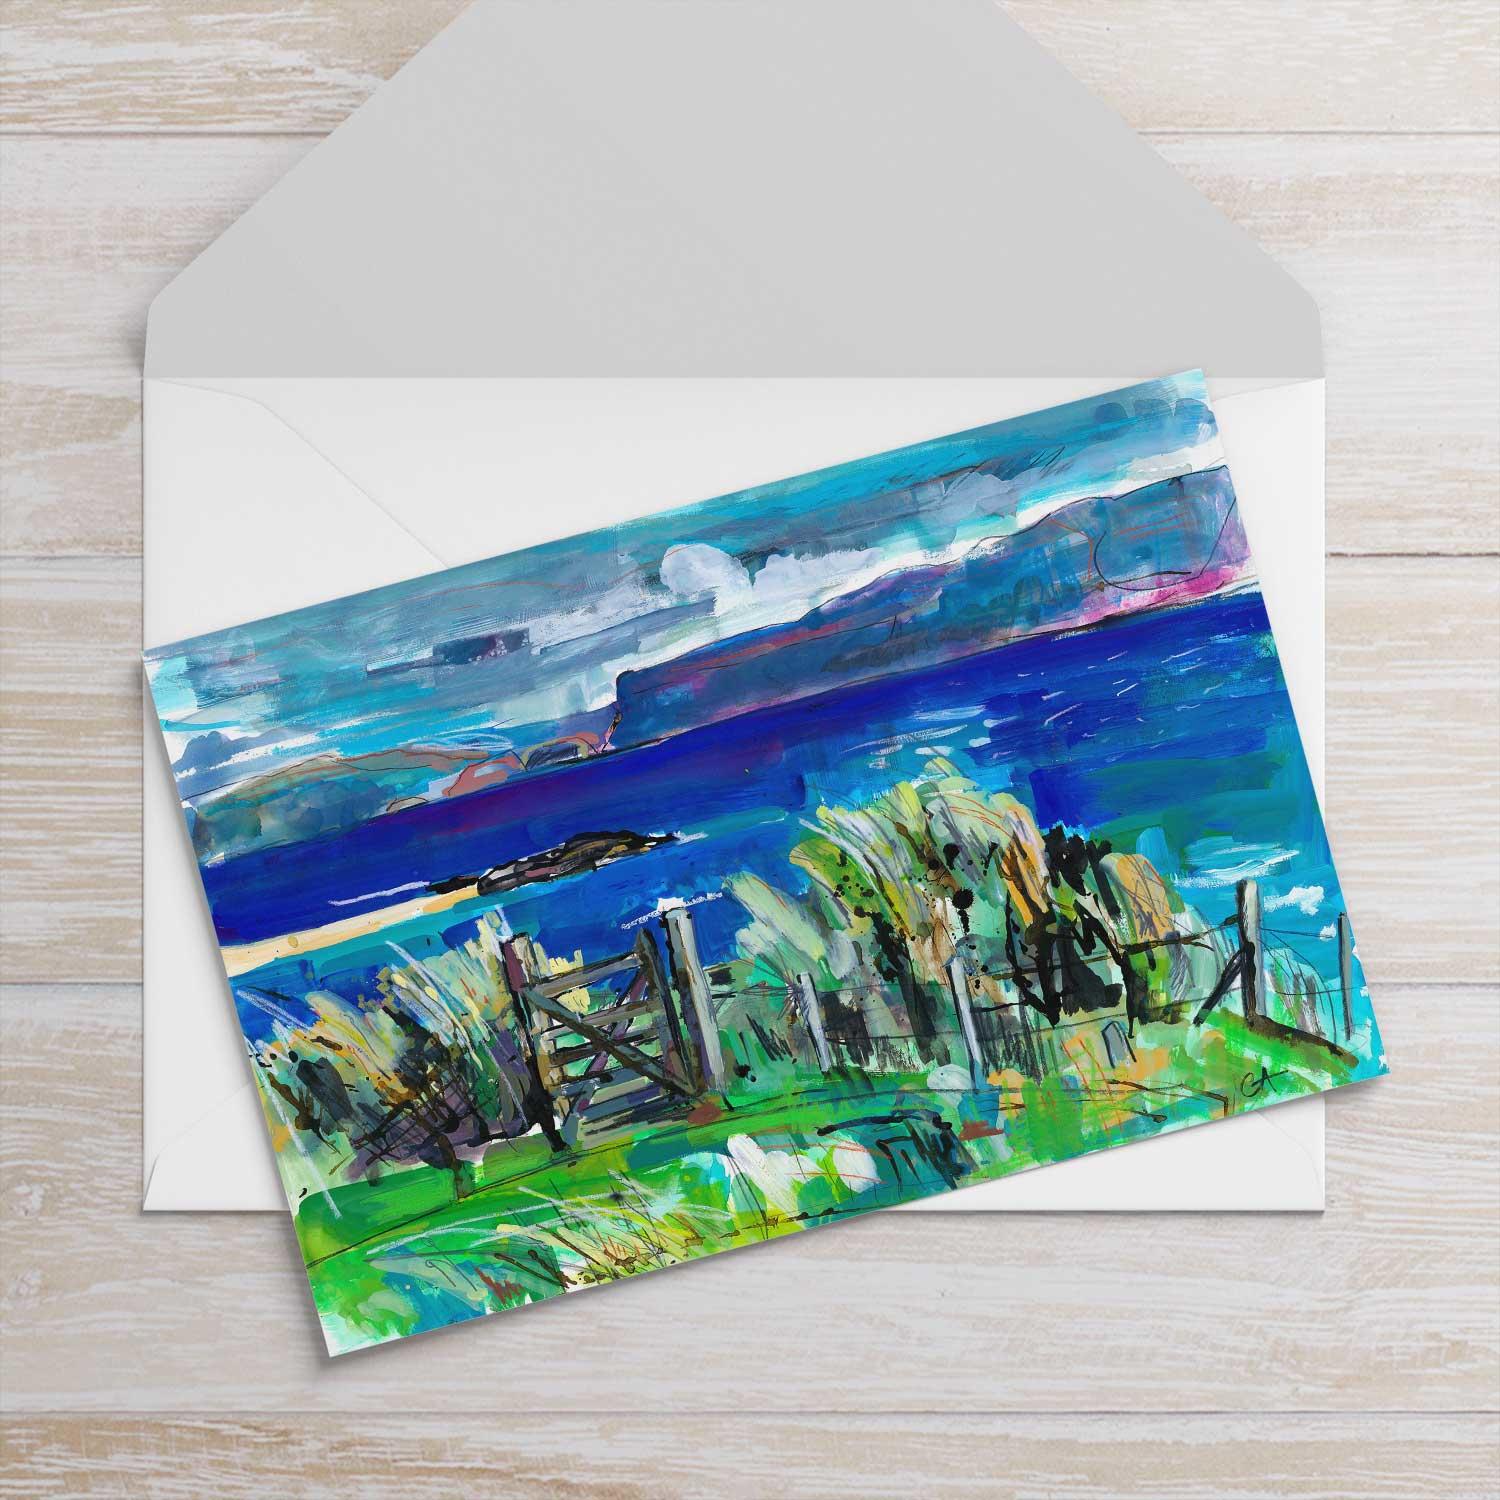 Hebrides Gate Greeting Card from an original painting by artist Clare Arbuthnott